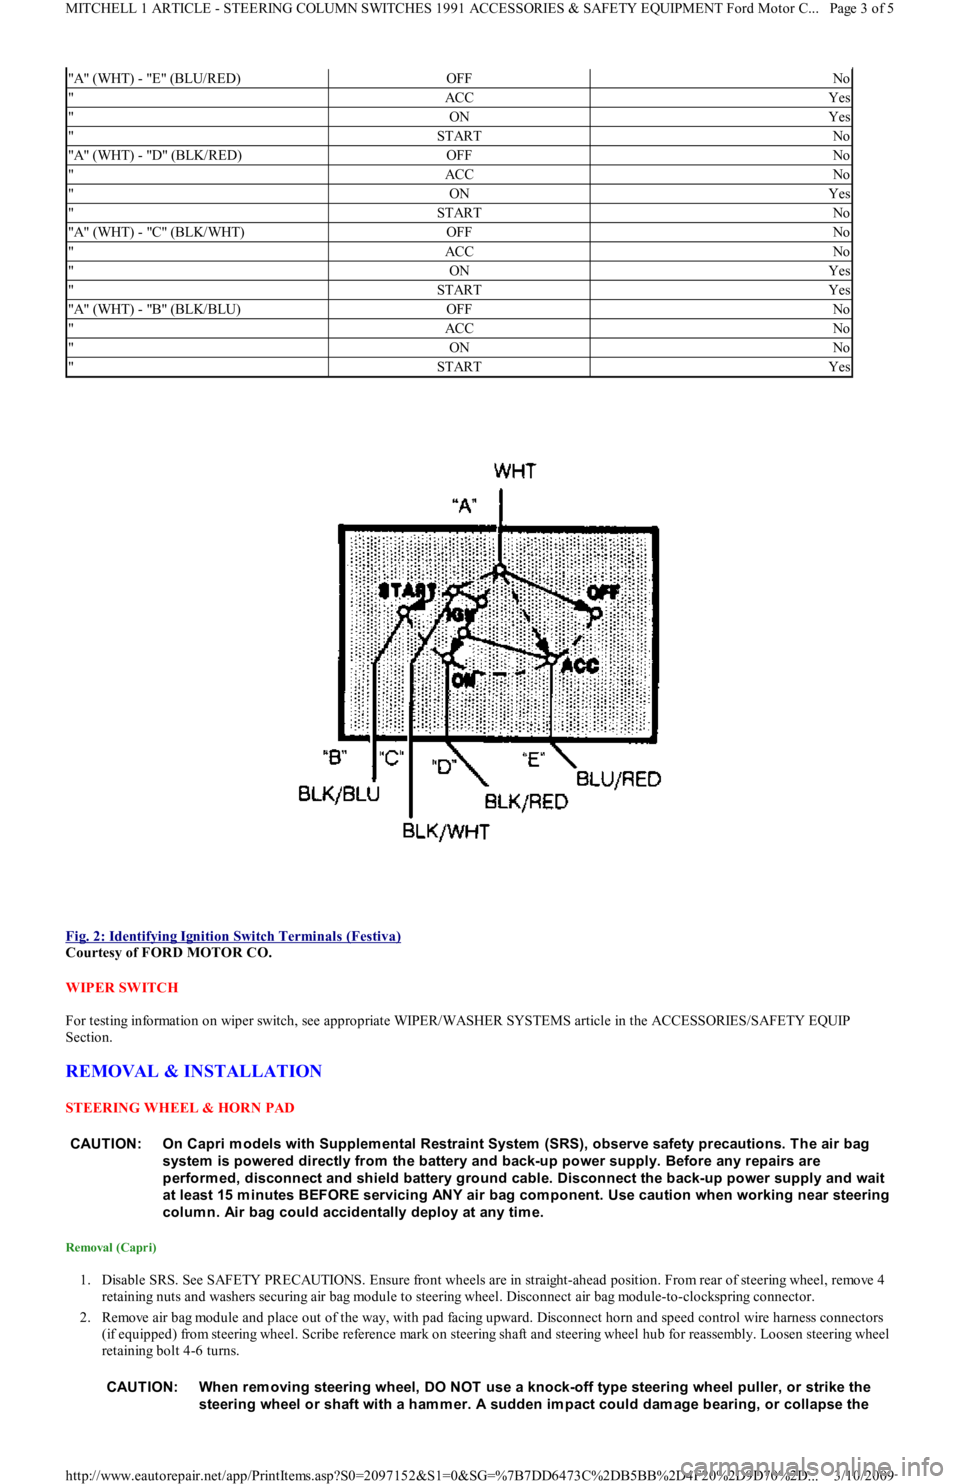 FORD FESTIVA 1991  Service Manual  
Fig. 2: Identifying Ignition Switch Terminals (Festiva)
 
Courtesy of FORD MOTOR CO. 
WIPER SWITCH 
For testing information on wiper switch, see appropriate WIPER/WASHER SYSTEMS article in the ACCES